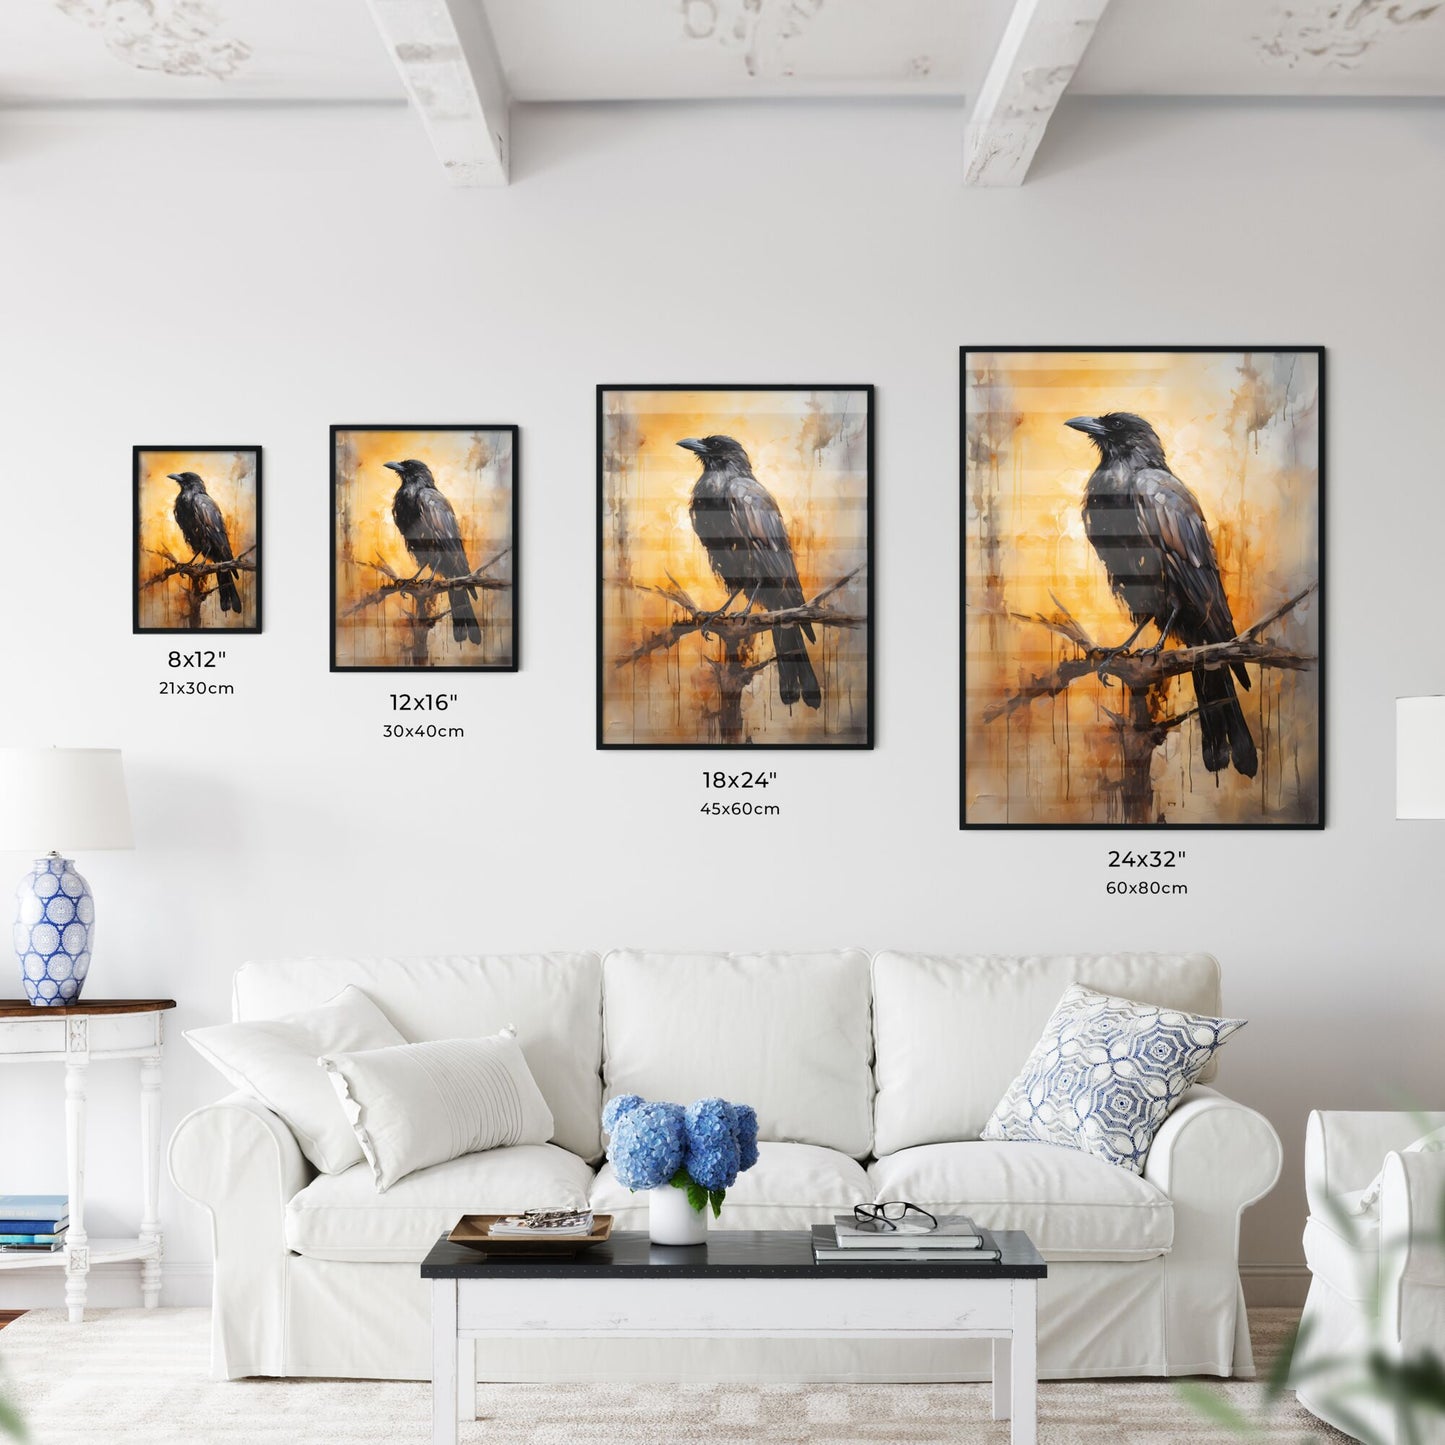 A Poster of A mysterious oil painting with a black crow - A Painting Of A Black Bird On A Branch Default Title